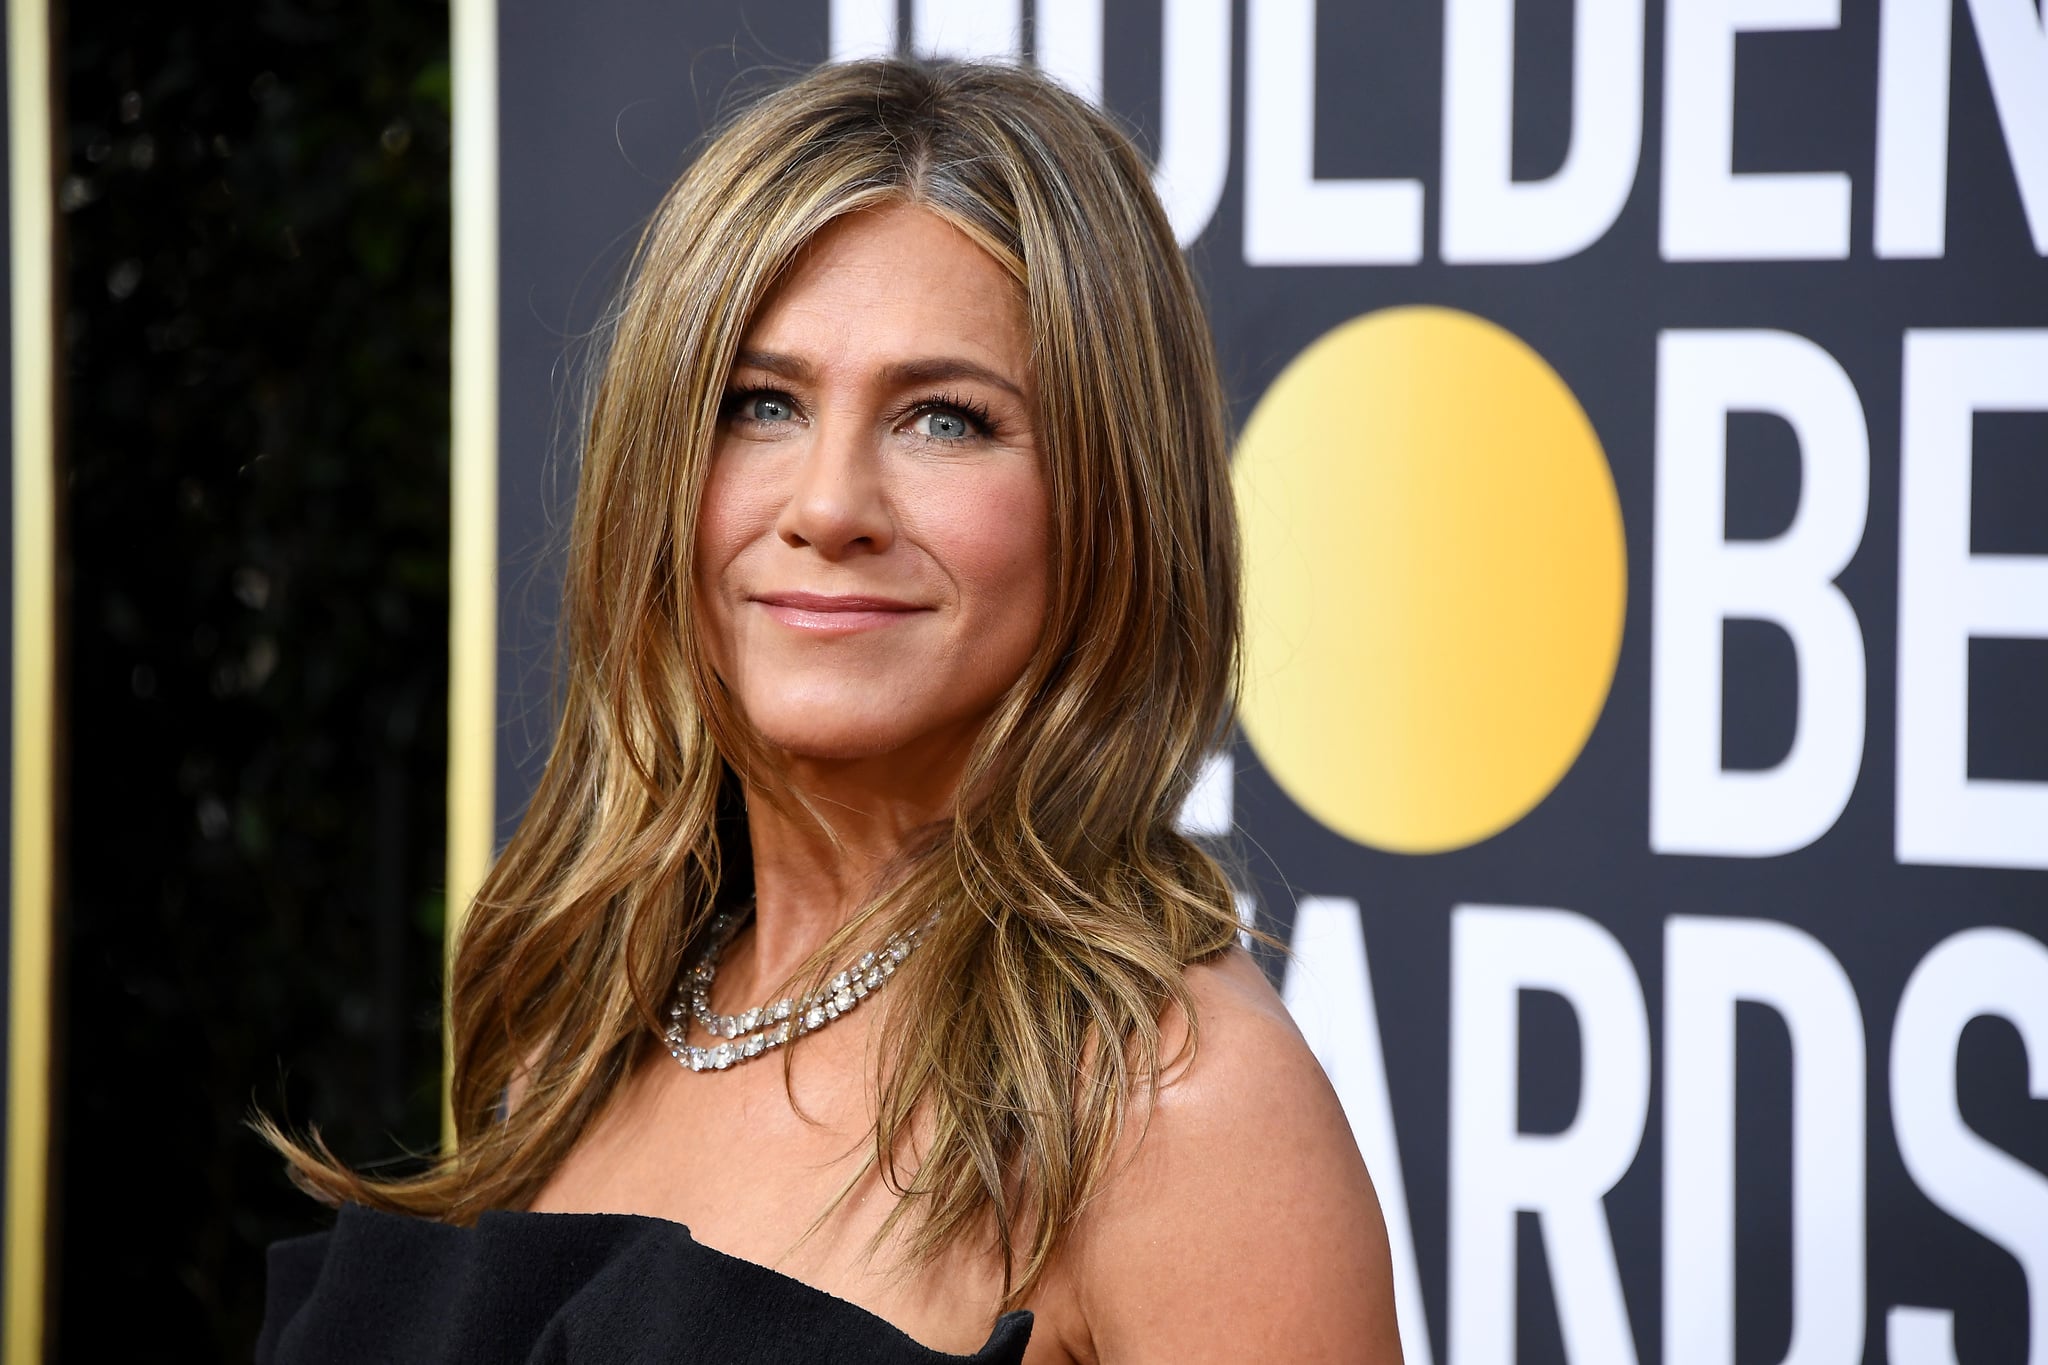 BEVERLY HILLS, CALIFORNIA - JANUARY 05: Jennifer Aniston attends the 77th Annual Golden Globe Awards at The Beverly Hilton Hotel on January 05, 2020 in Beverly Hills, California. (Photo by Steve Granitz/WireImage)